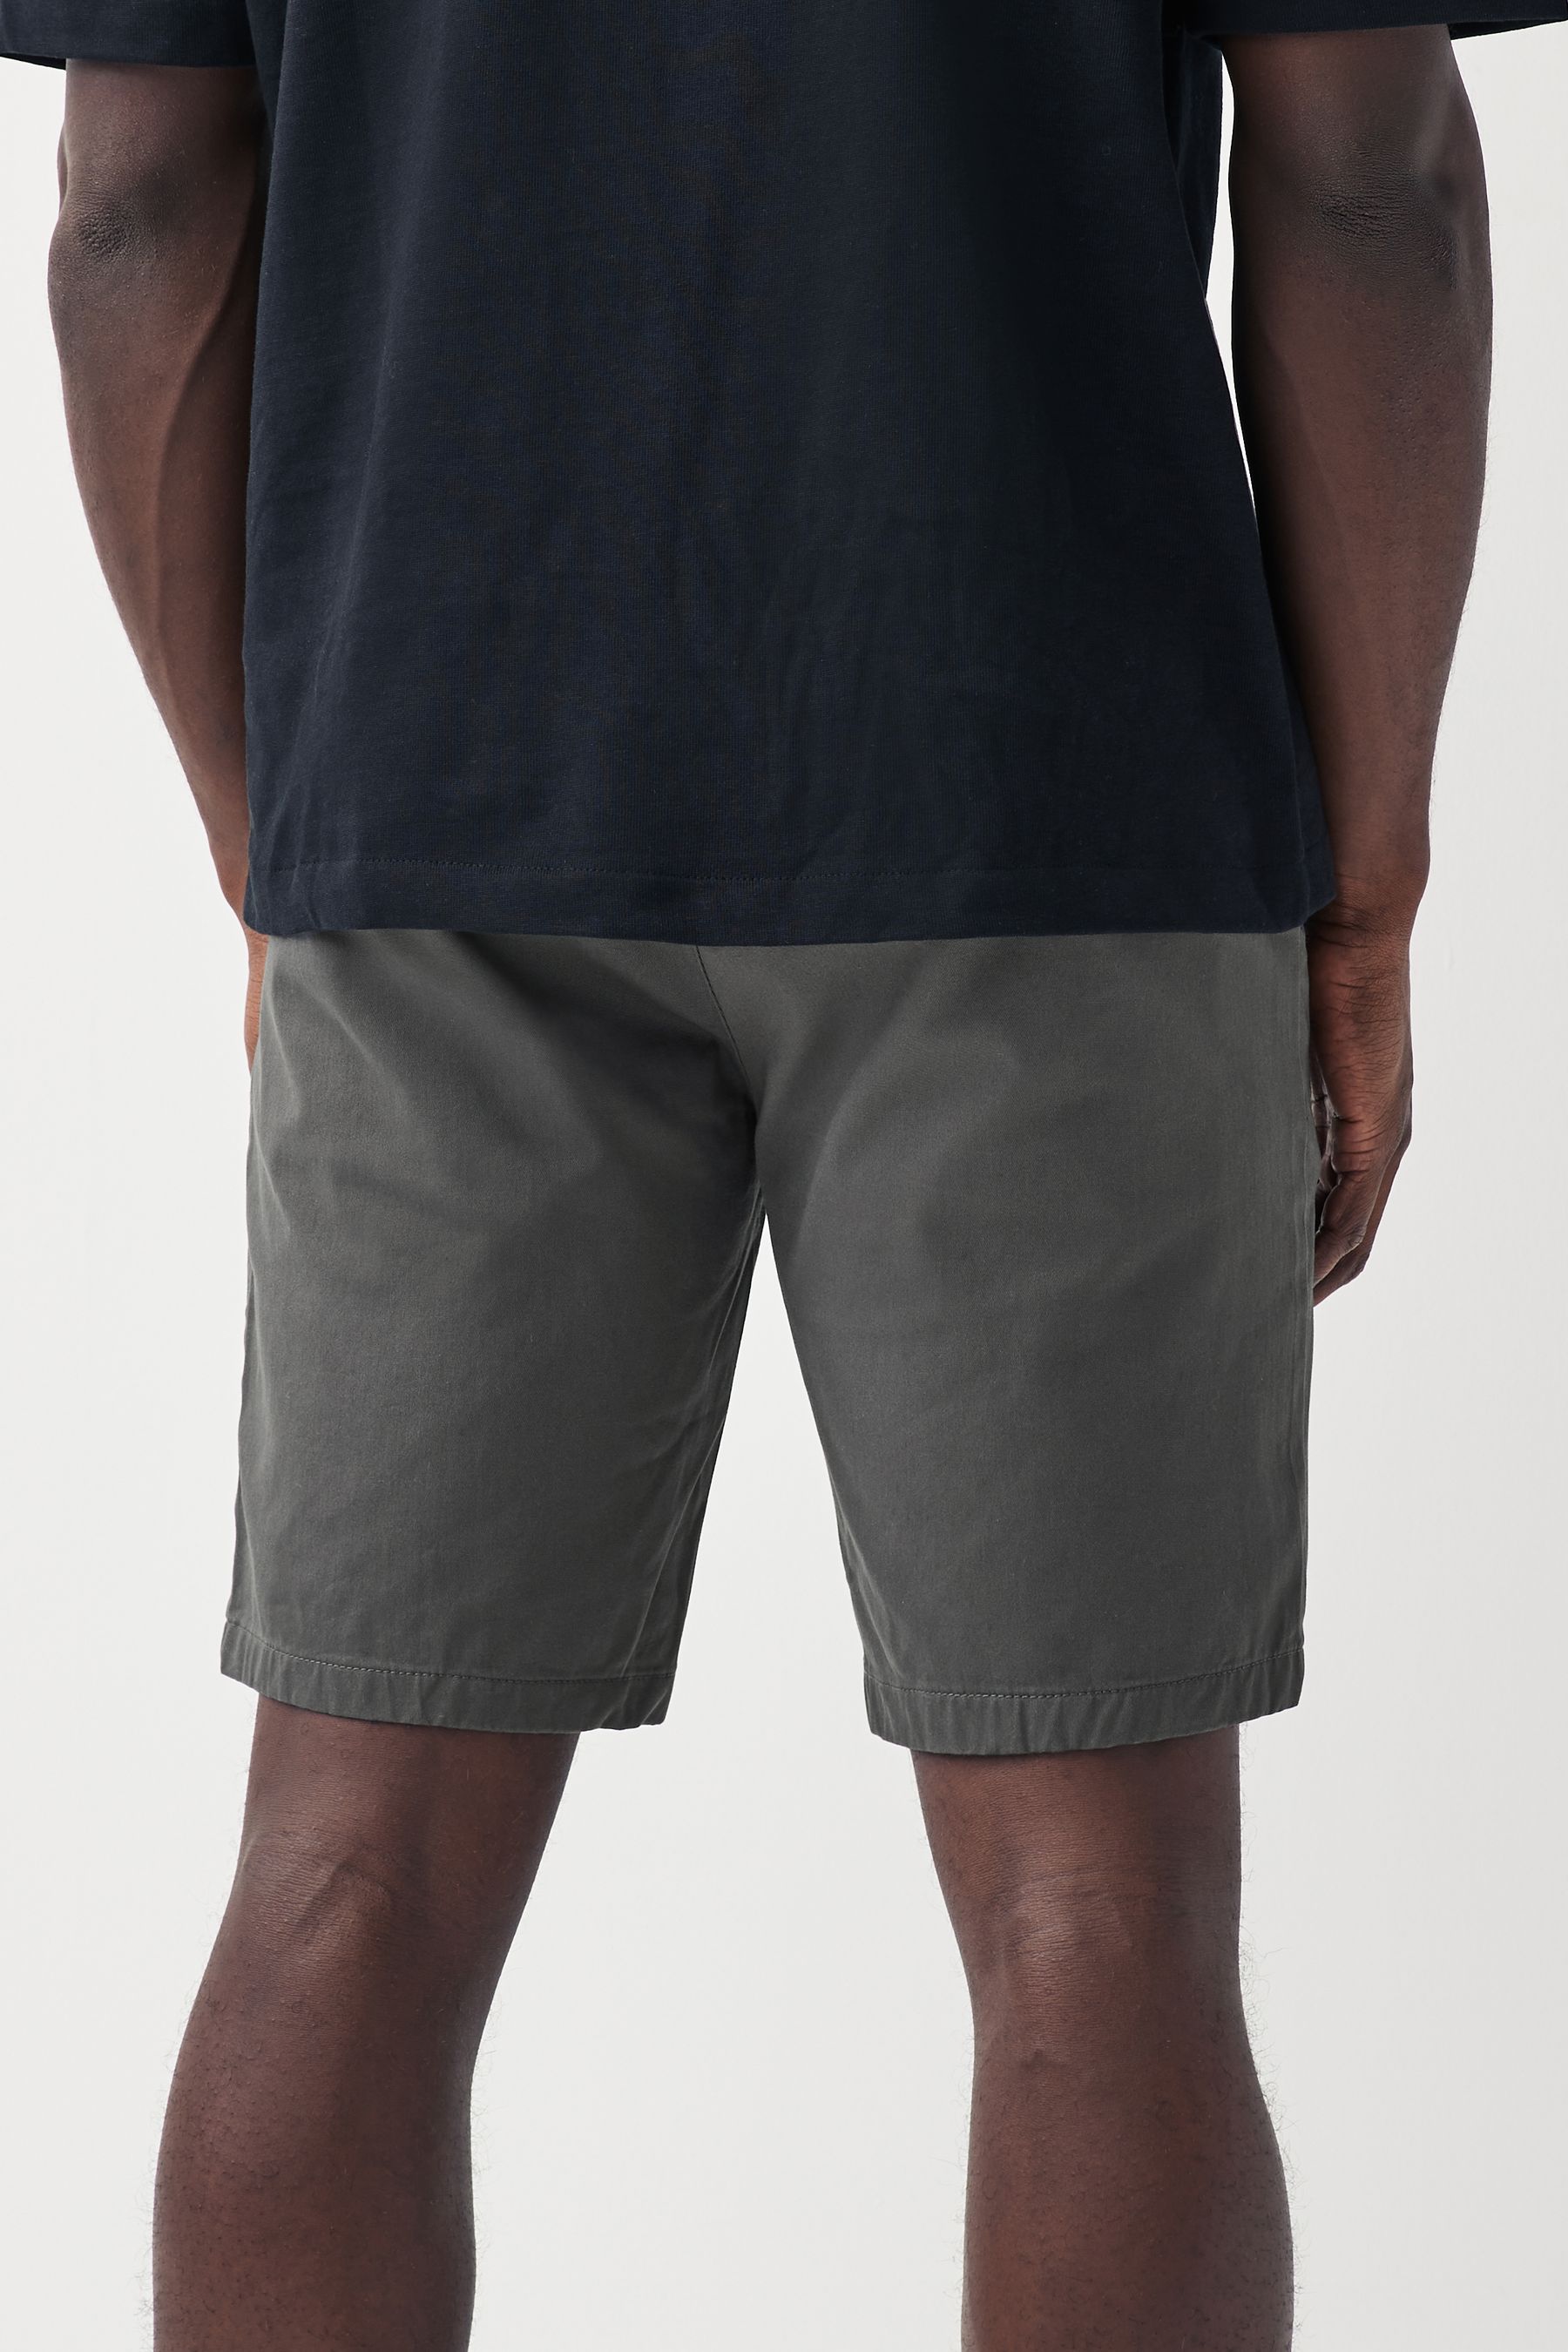 Buy Charcoal Grey Slim Stretch Chino Shorts from the Next UK online shop